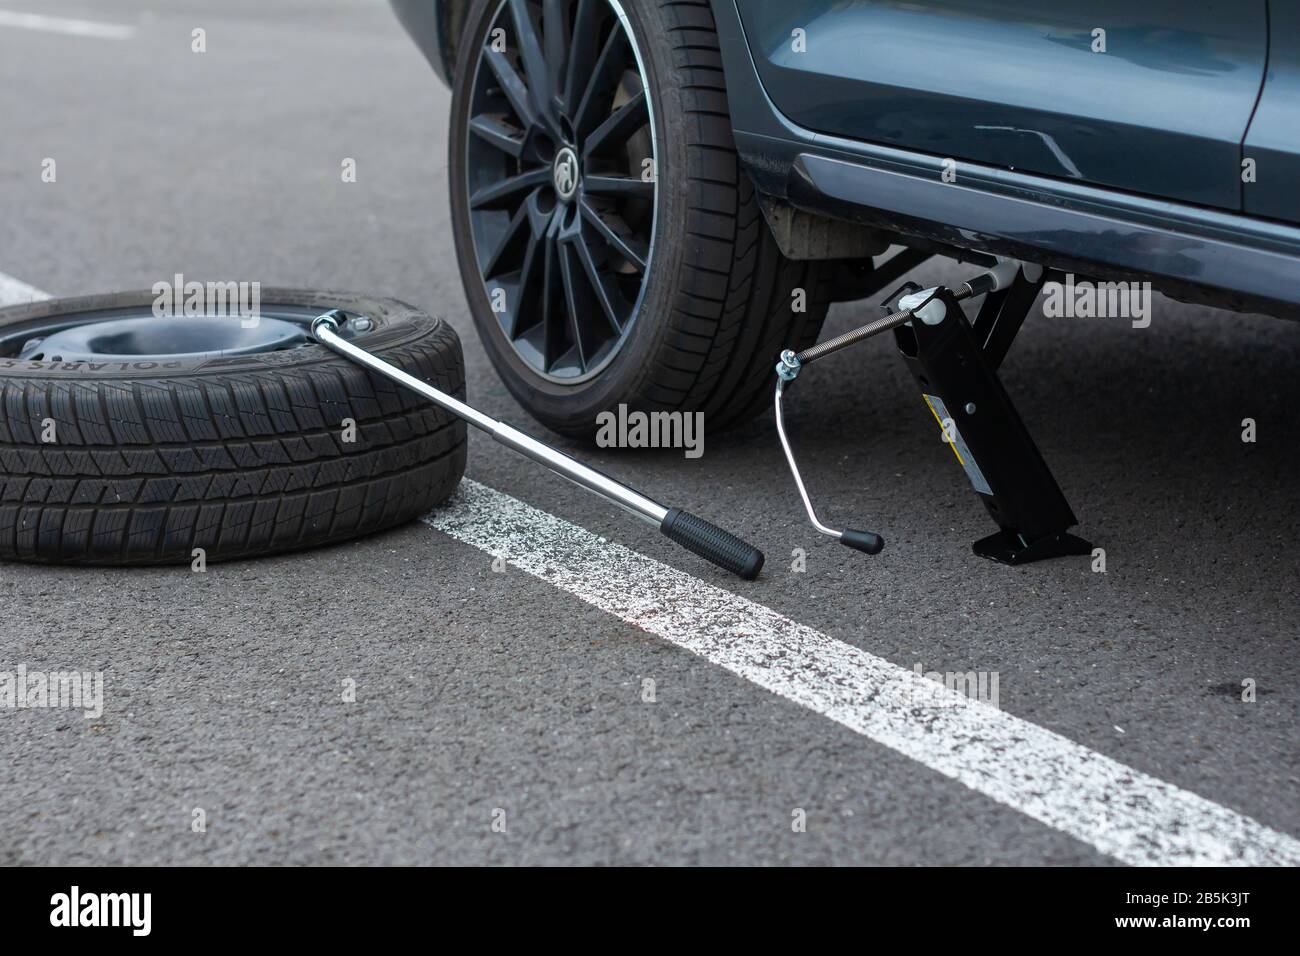 A flat tire car wheel and screwdriver are on a asphalt road on the broken car background. Jack is lifting up a vehicle. Automobile service. Tire Stock Photo